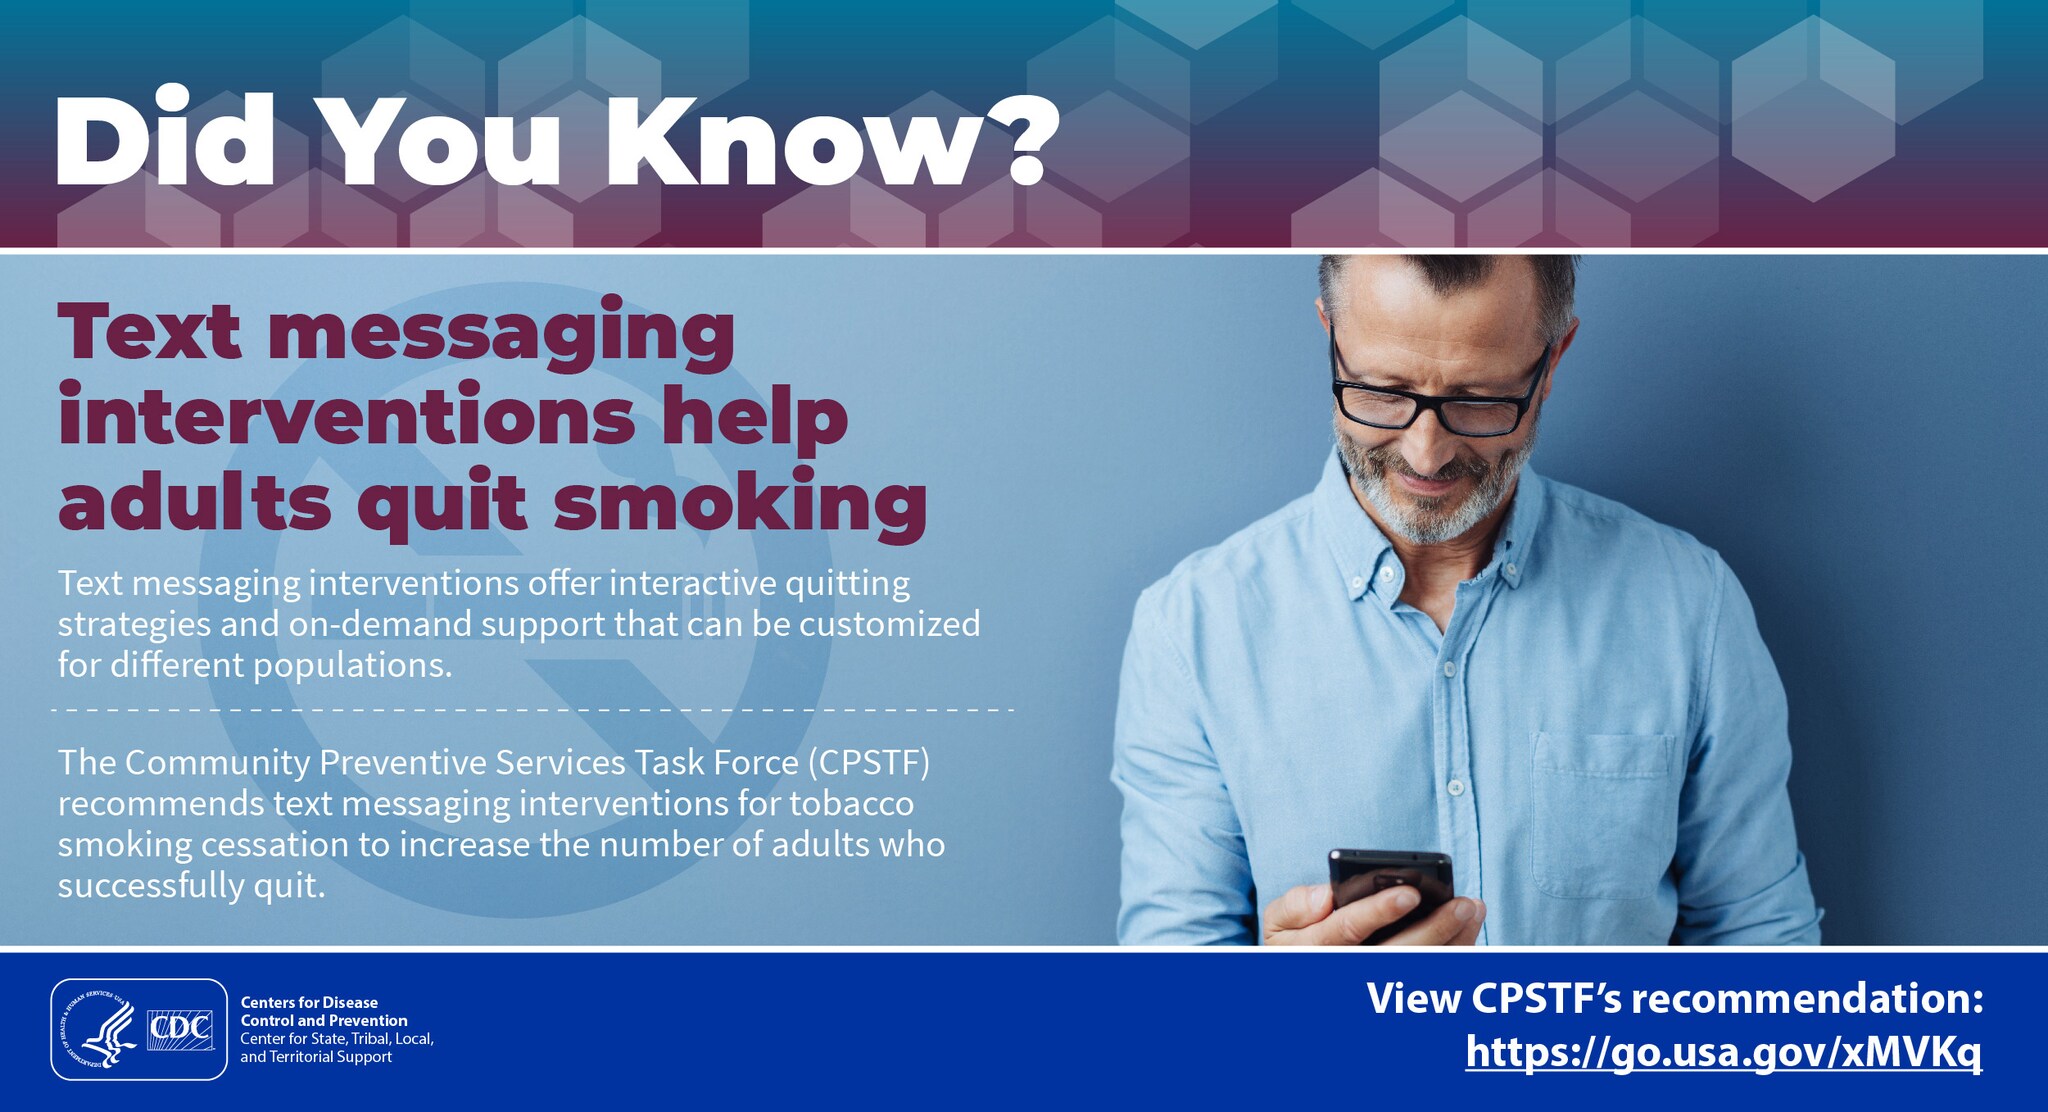 Did You Know? Text messaging interventions help adults quit smoking. Text messaging interventions offer interactive quitting strategies and on-demand support that can be customized for different populations. The Community Preventive Services Task Force (CPSTF) recommends text messaging interventions for tobacco smoking cessation to increase the number of adults who successfully quit. View CPSTF’s recommendation: https://go.usa.gov/xMVKq